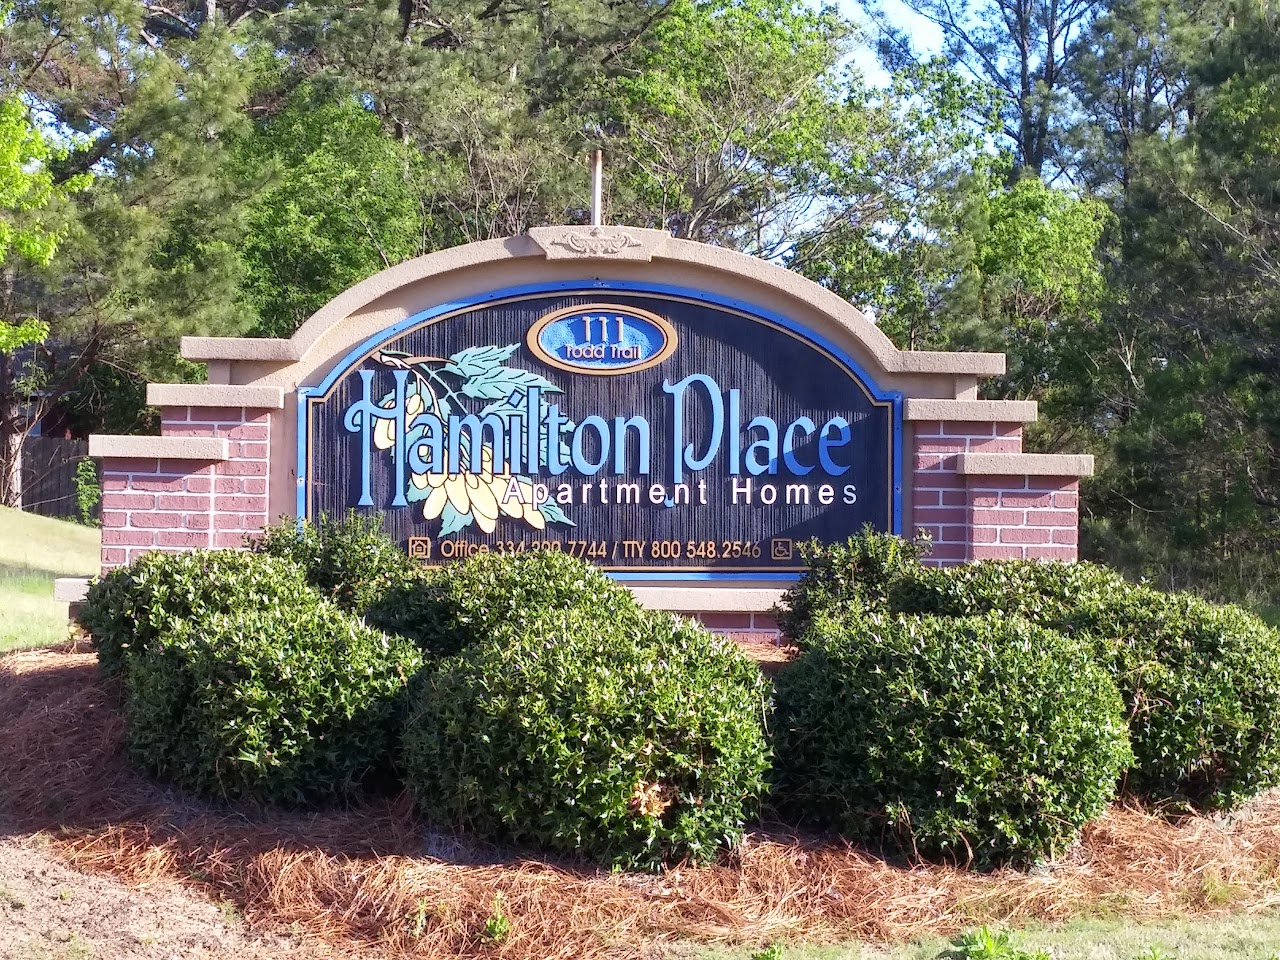 Photo of HAMILTON PLACE APTS. Affordable housing located at 111 TODD TRAIL MILLBROOK, AL 36054